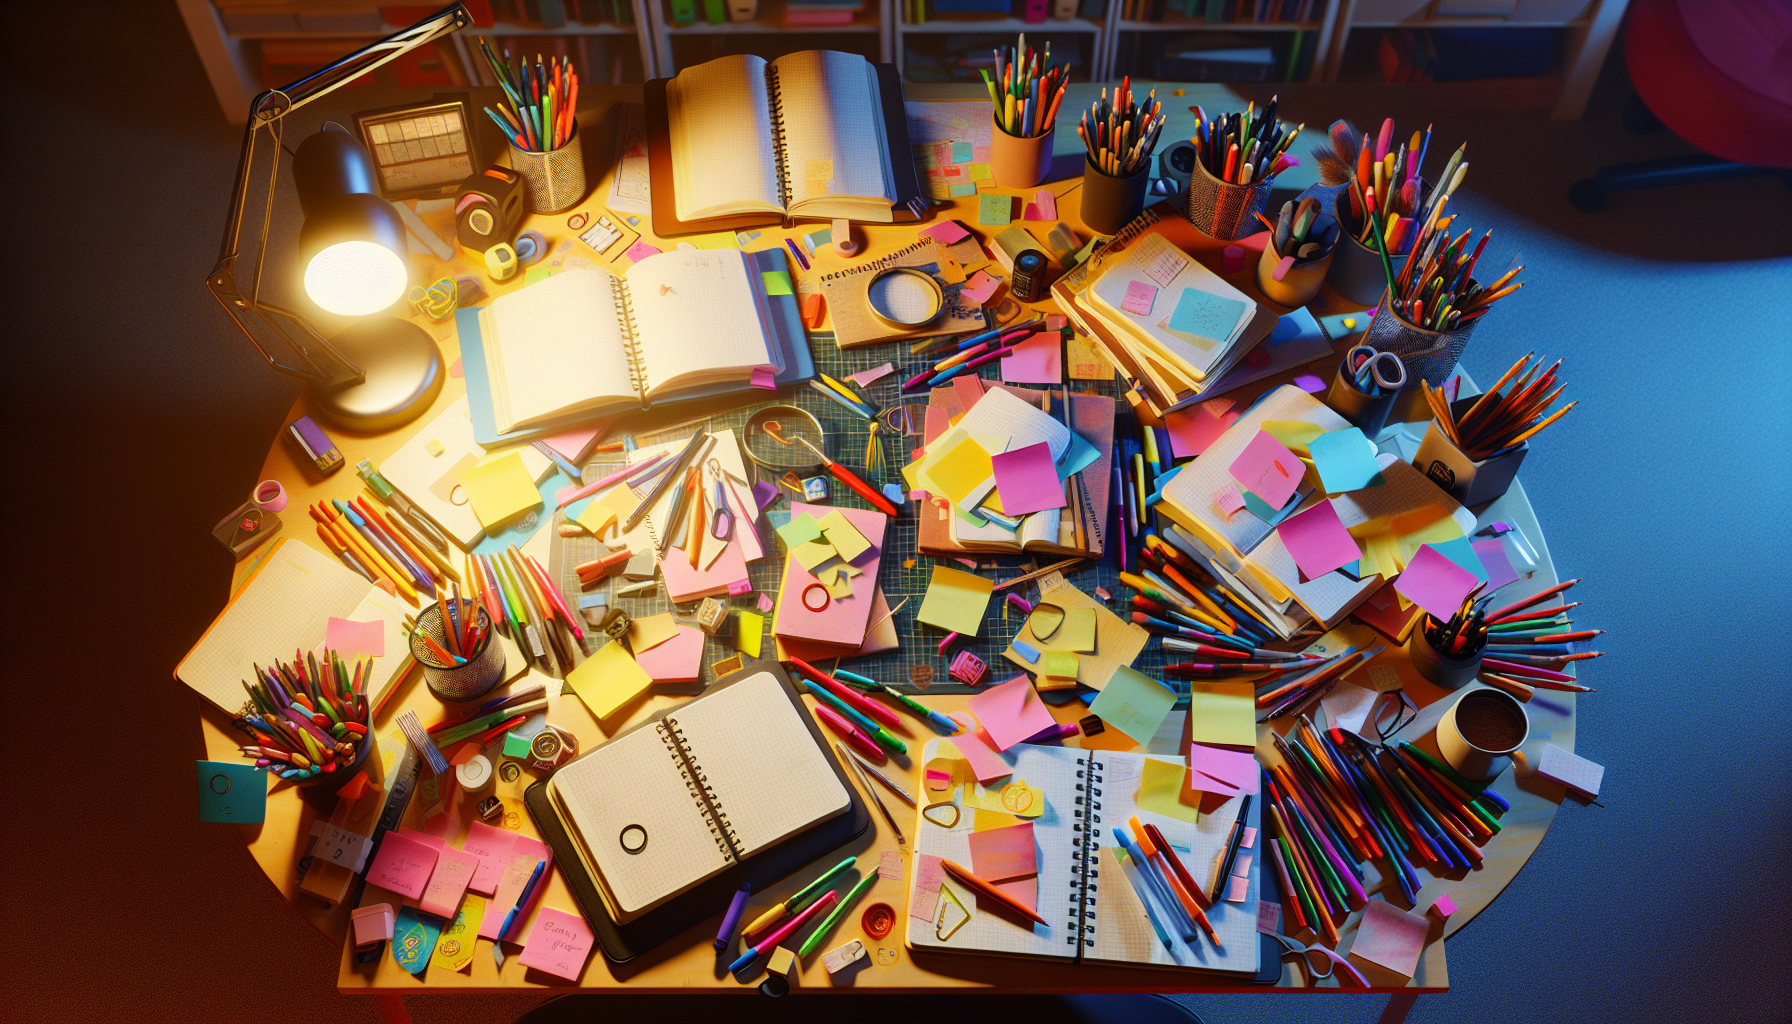 A cluttered desk with open notebooks, scattered index cards, colorful pens, and sticky notes, illuminated by a warm lamp.